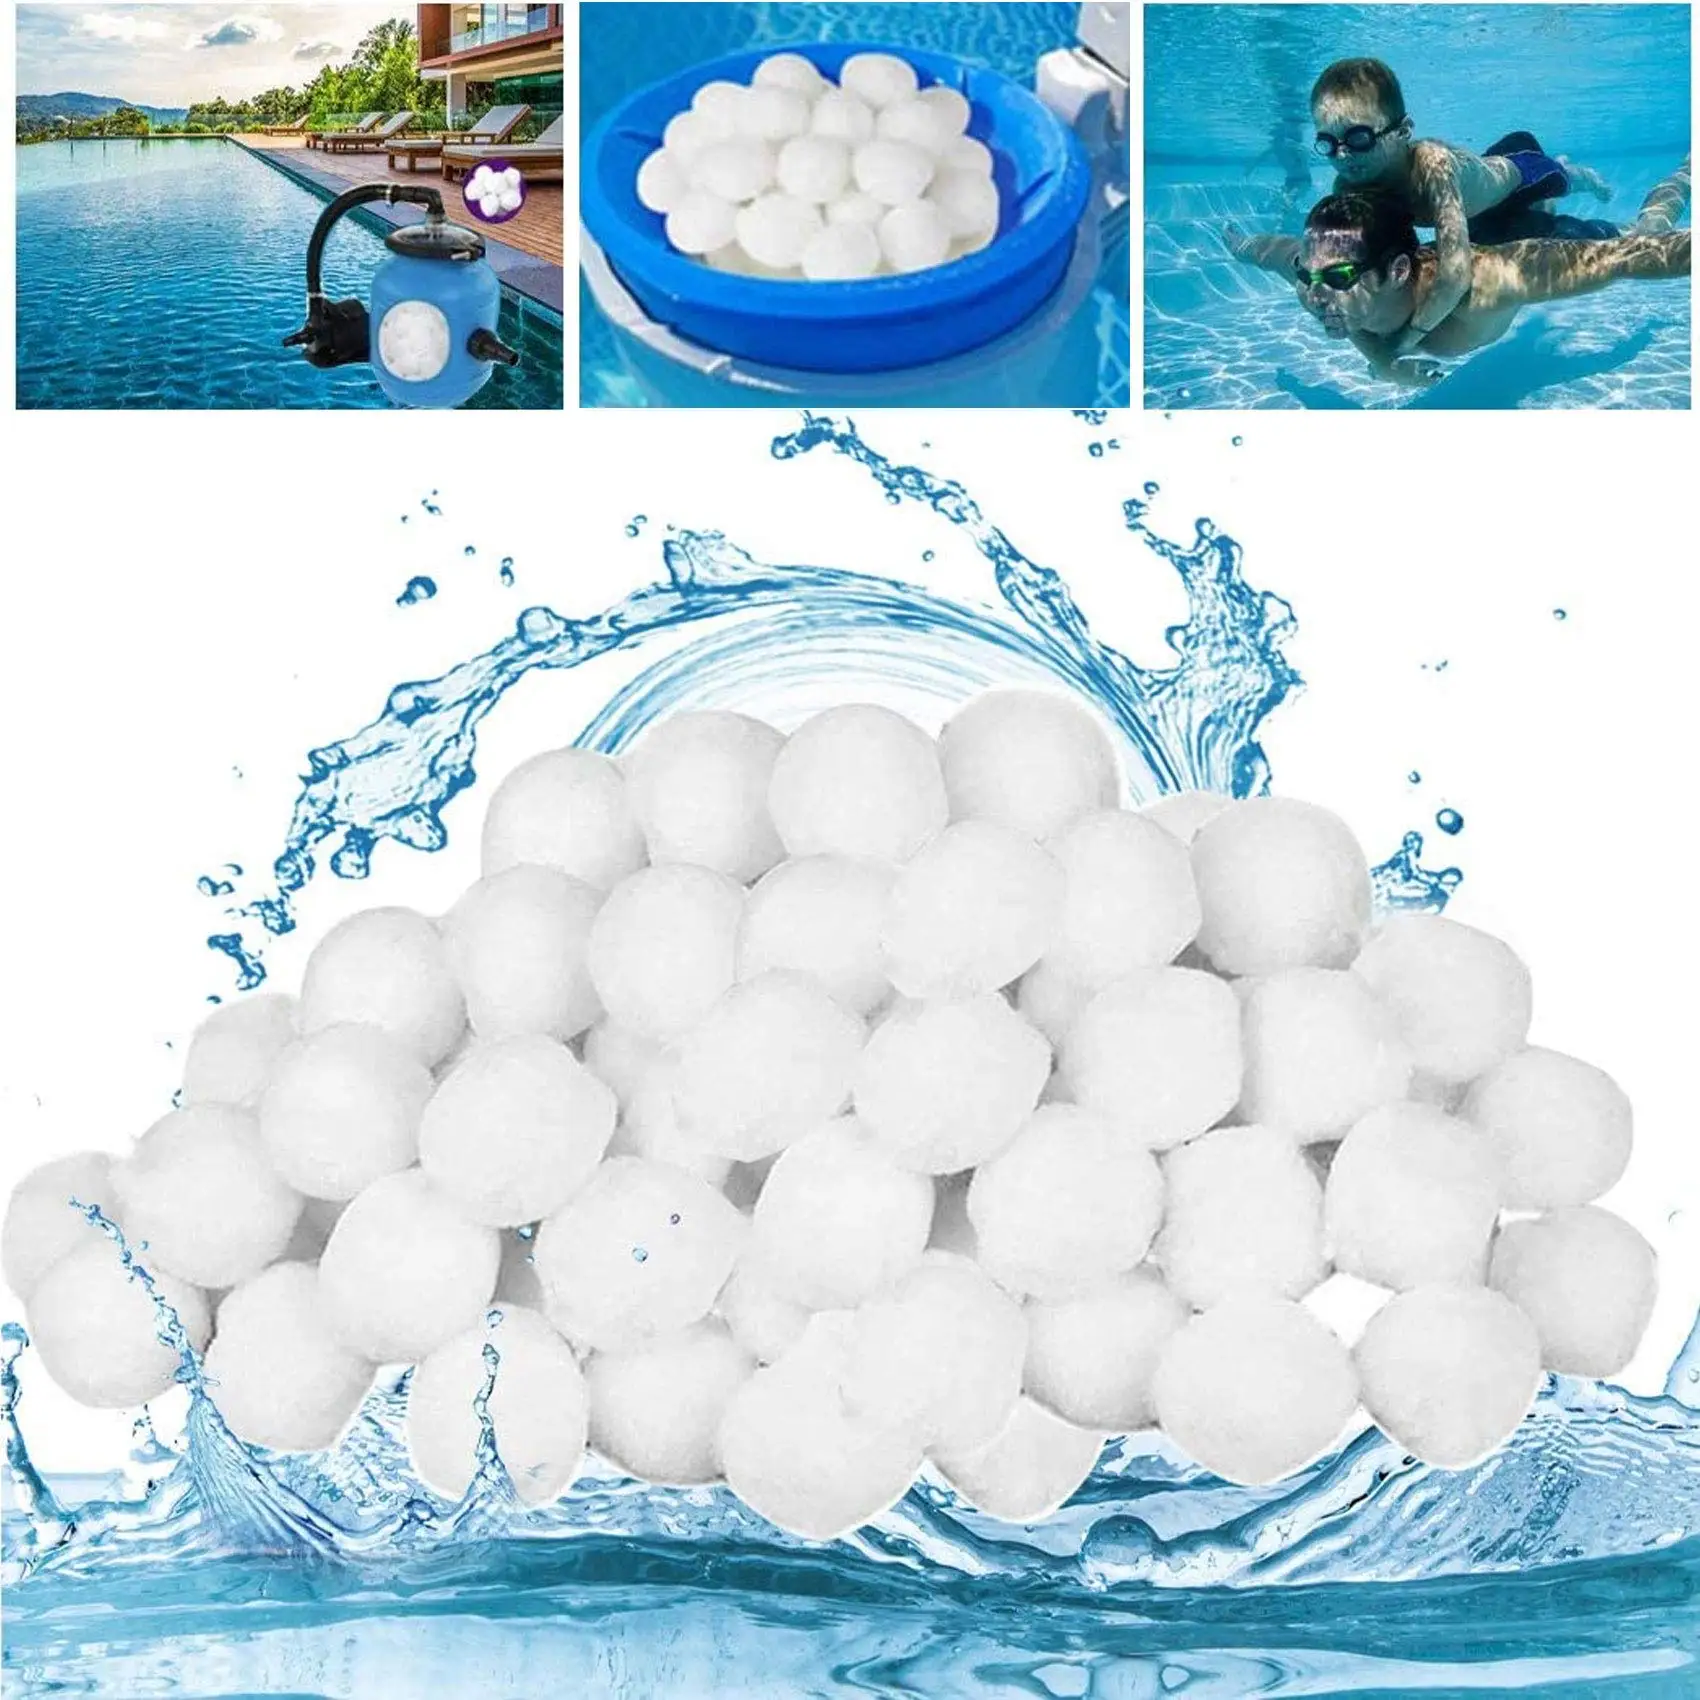 Pool Filter Balls, Filter Balls For Sand Filter Eco-Friendly Fiber Ball for Pond, Swimming Pool Sand Filters Media Water Filteri da29 00020b refrigerator water filter replacement for samsung da29 00020b da29 00020a haf cin exp 46 9101 wd f27 3 filters